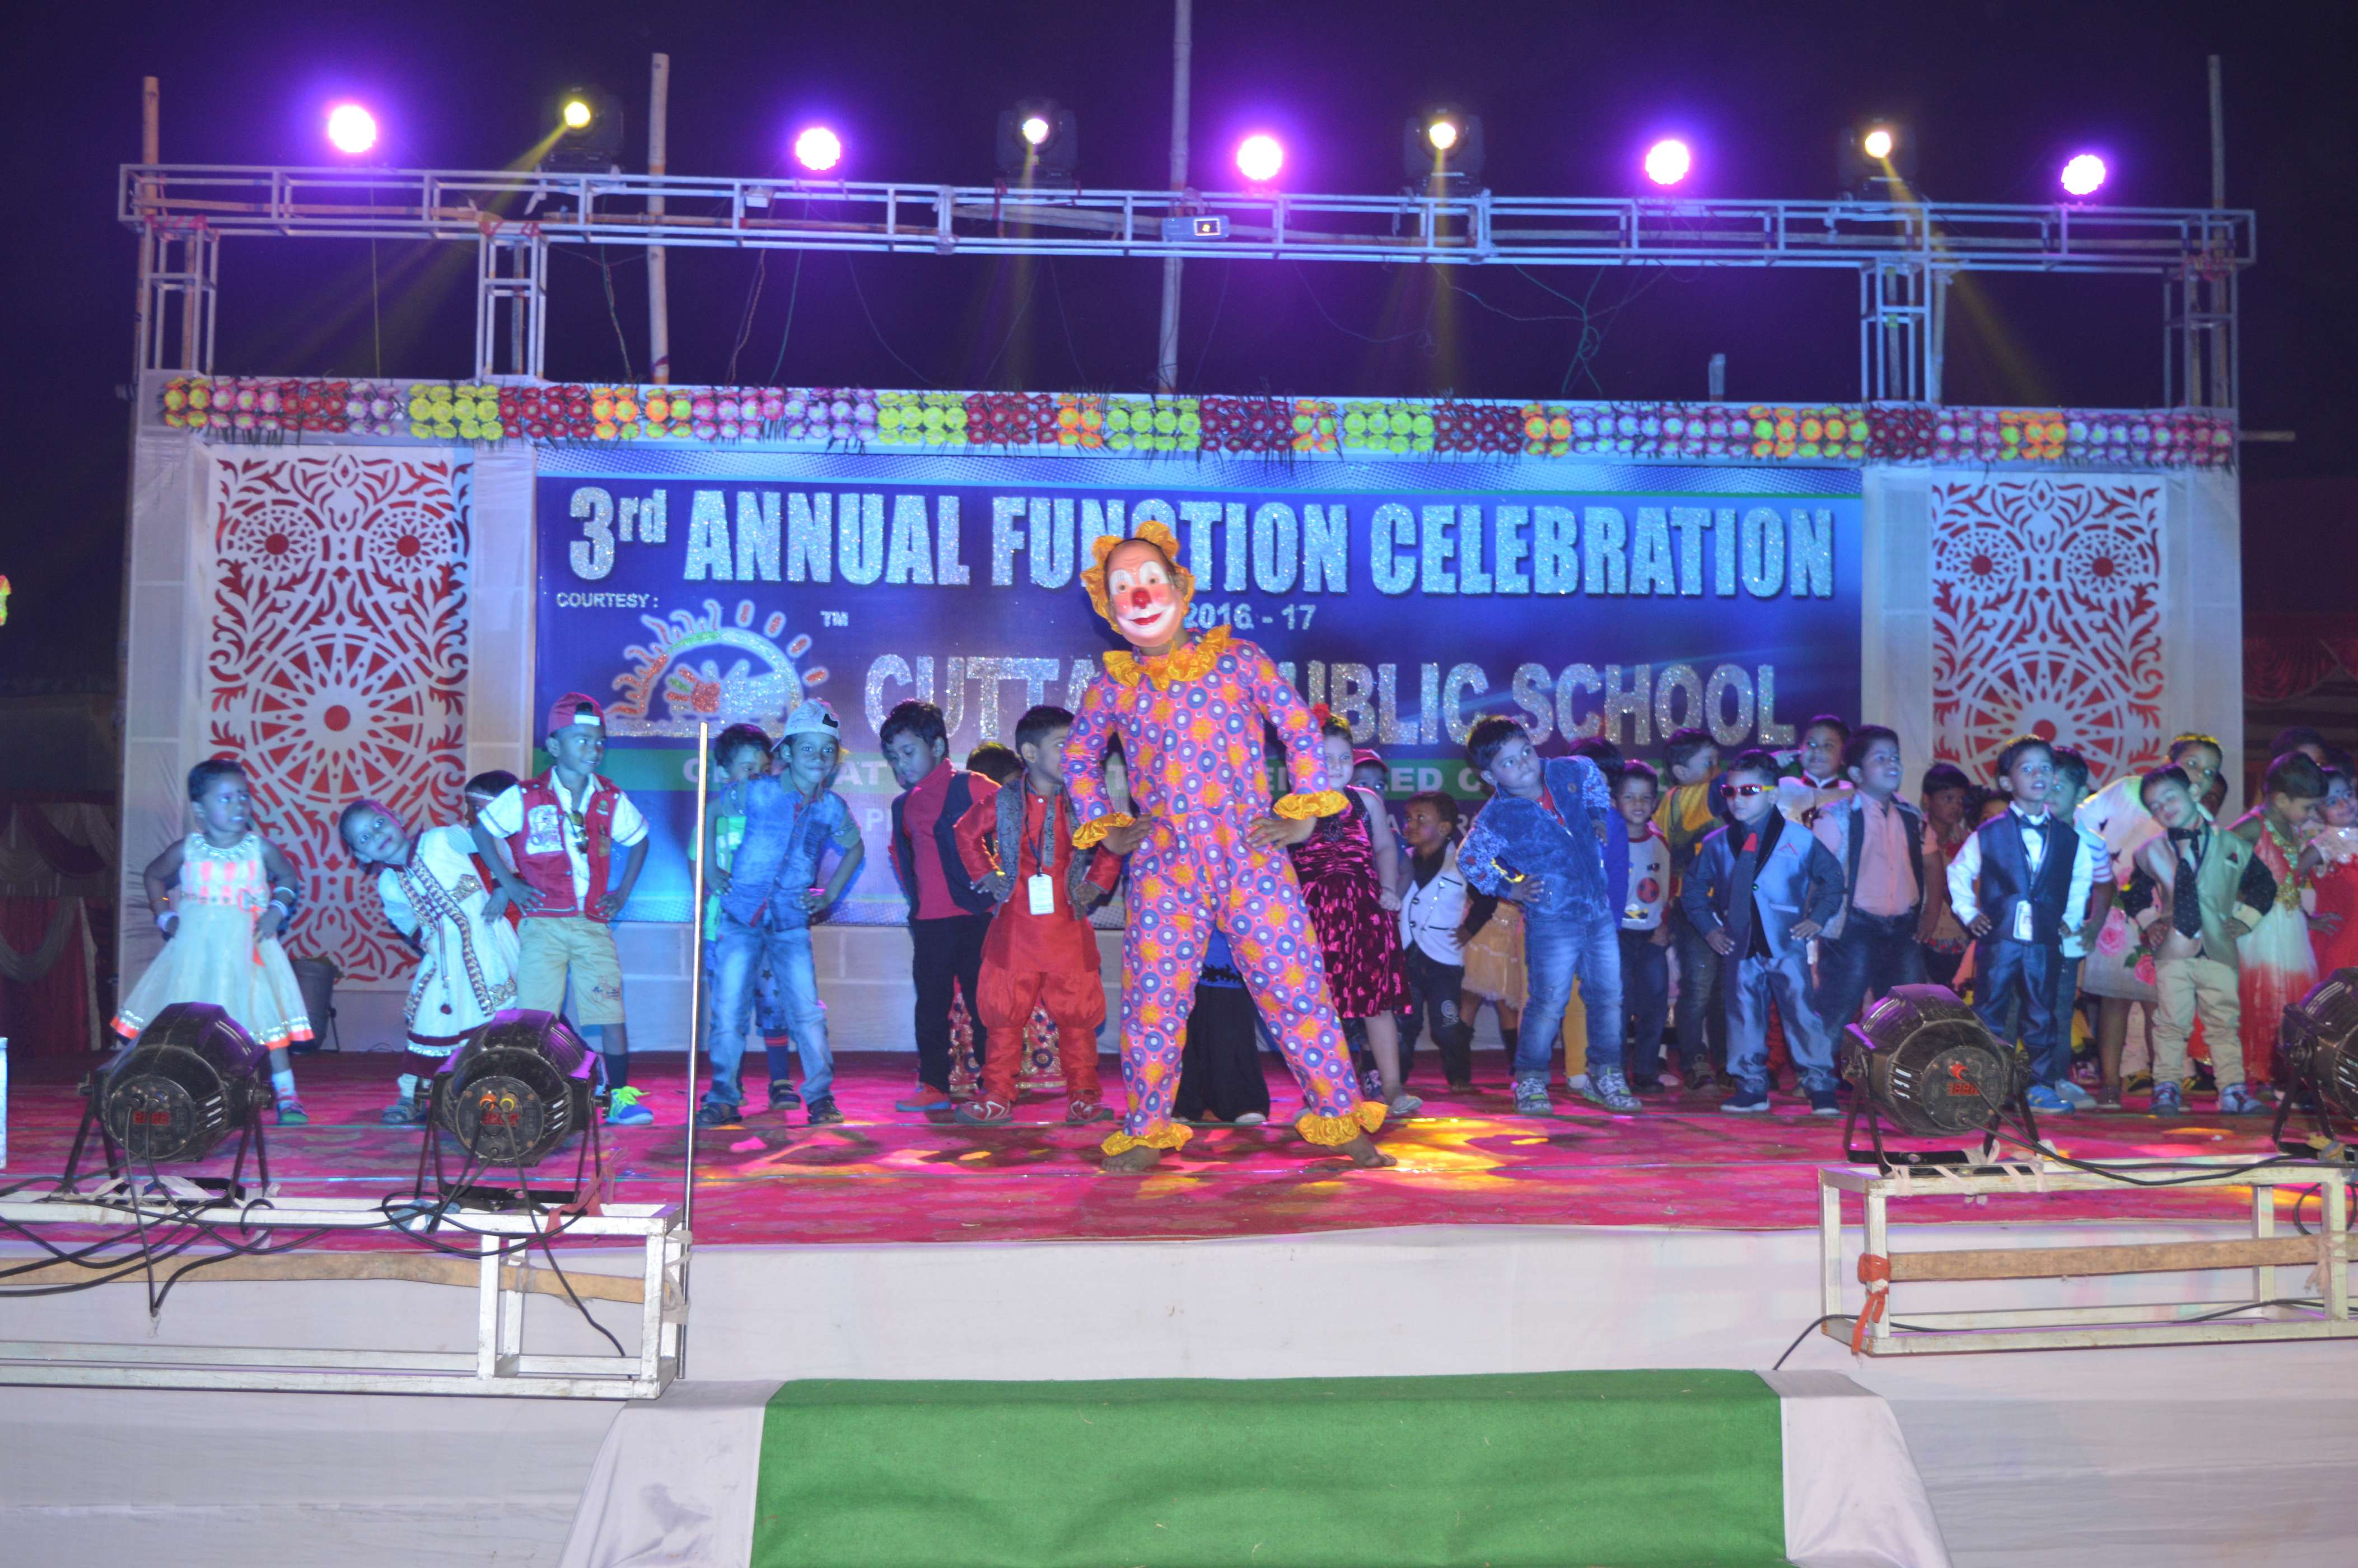 3rd ANNUAL FUNCTION - 2016